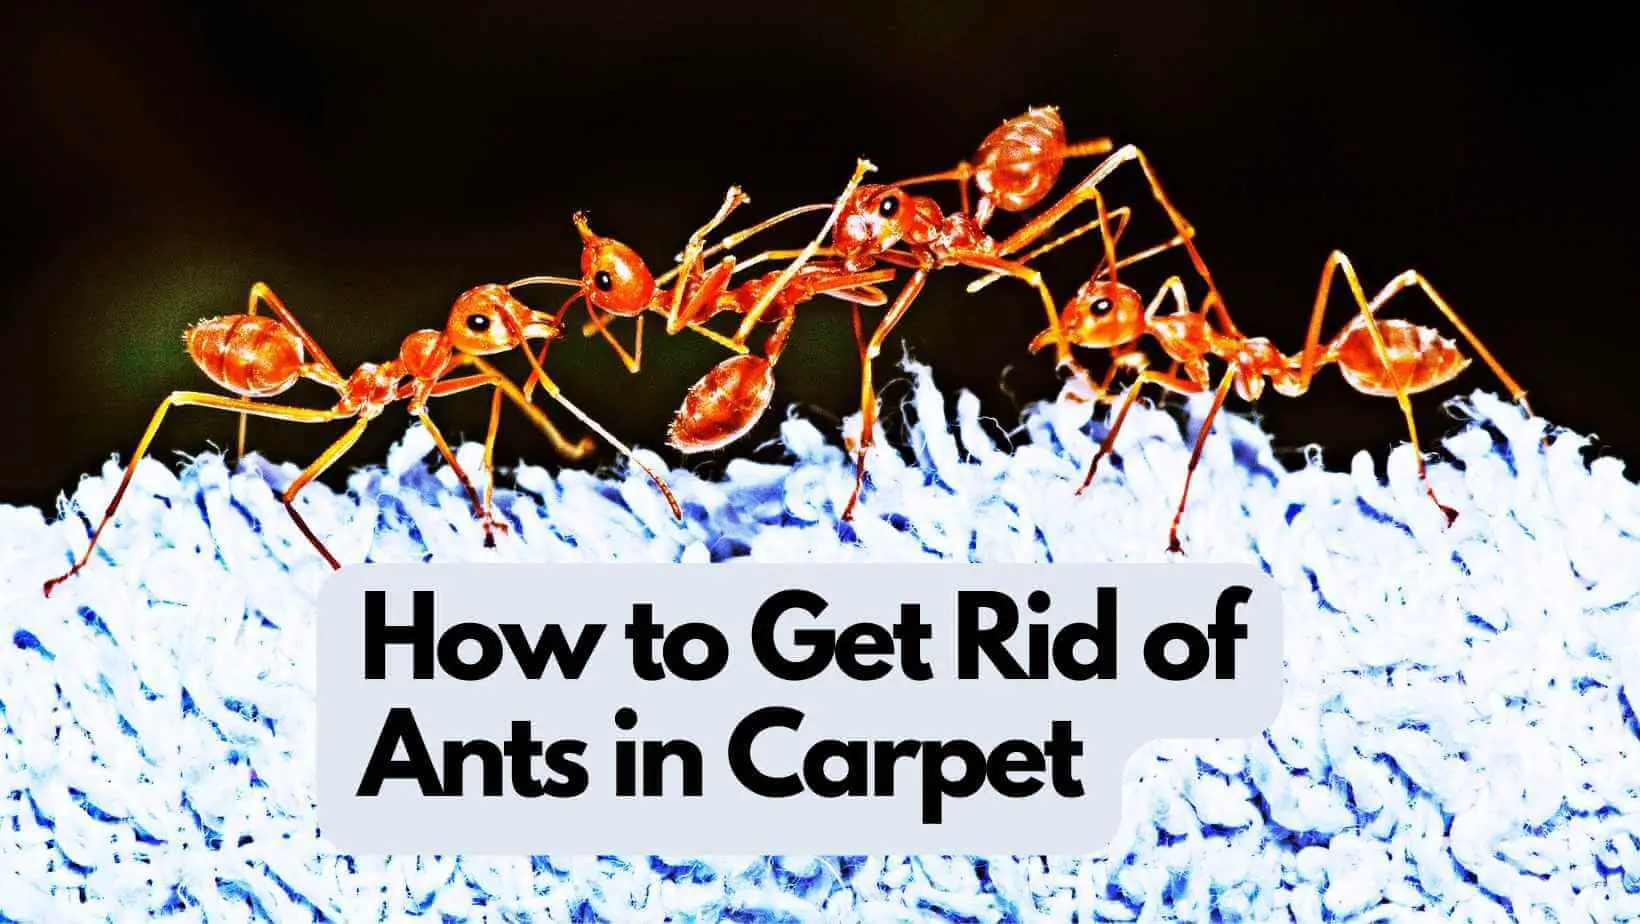 How to Get Rid of Ants in Carpet